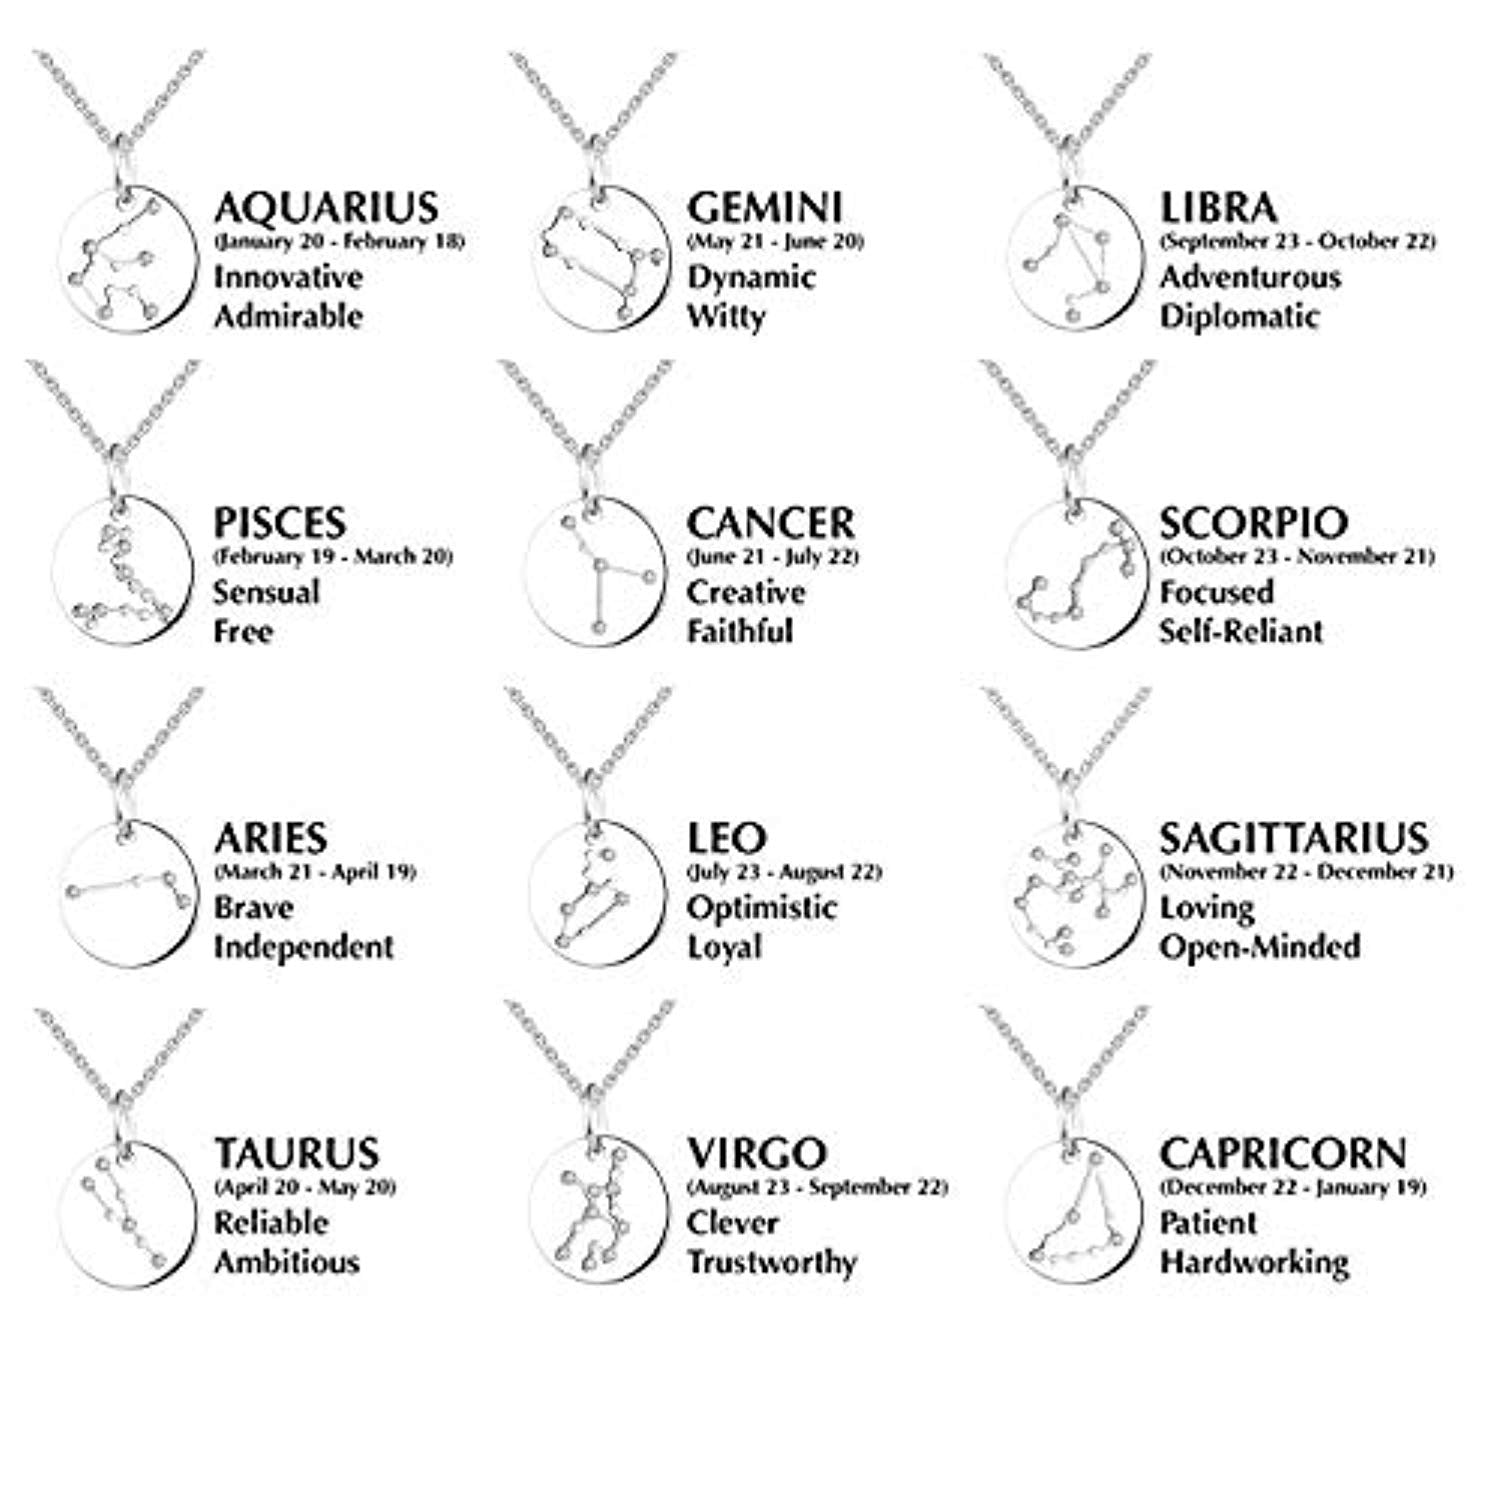 Women's Constellation Jewelry Sterling Silver Zodiac Necklace Astrology Coin Disc Horoscope Pendant